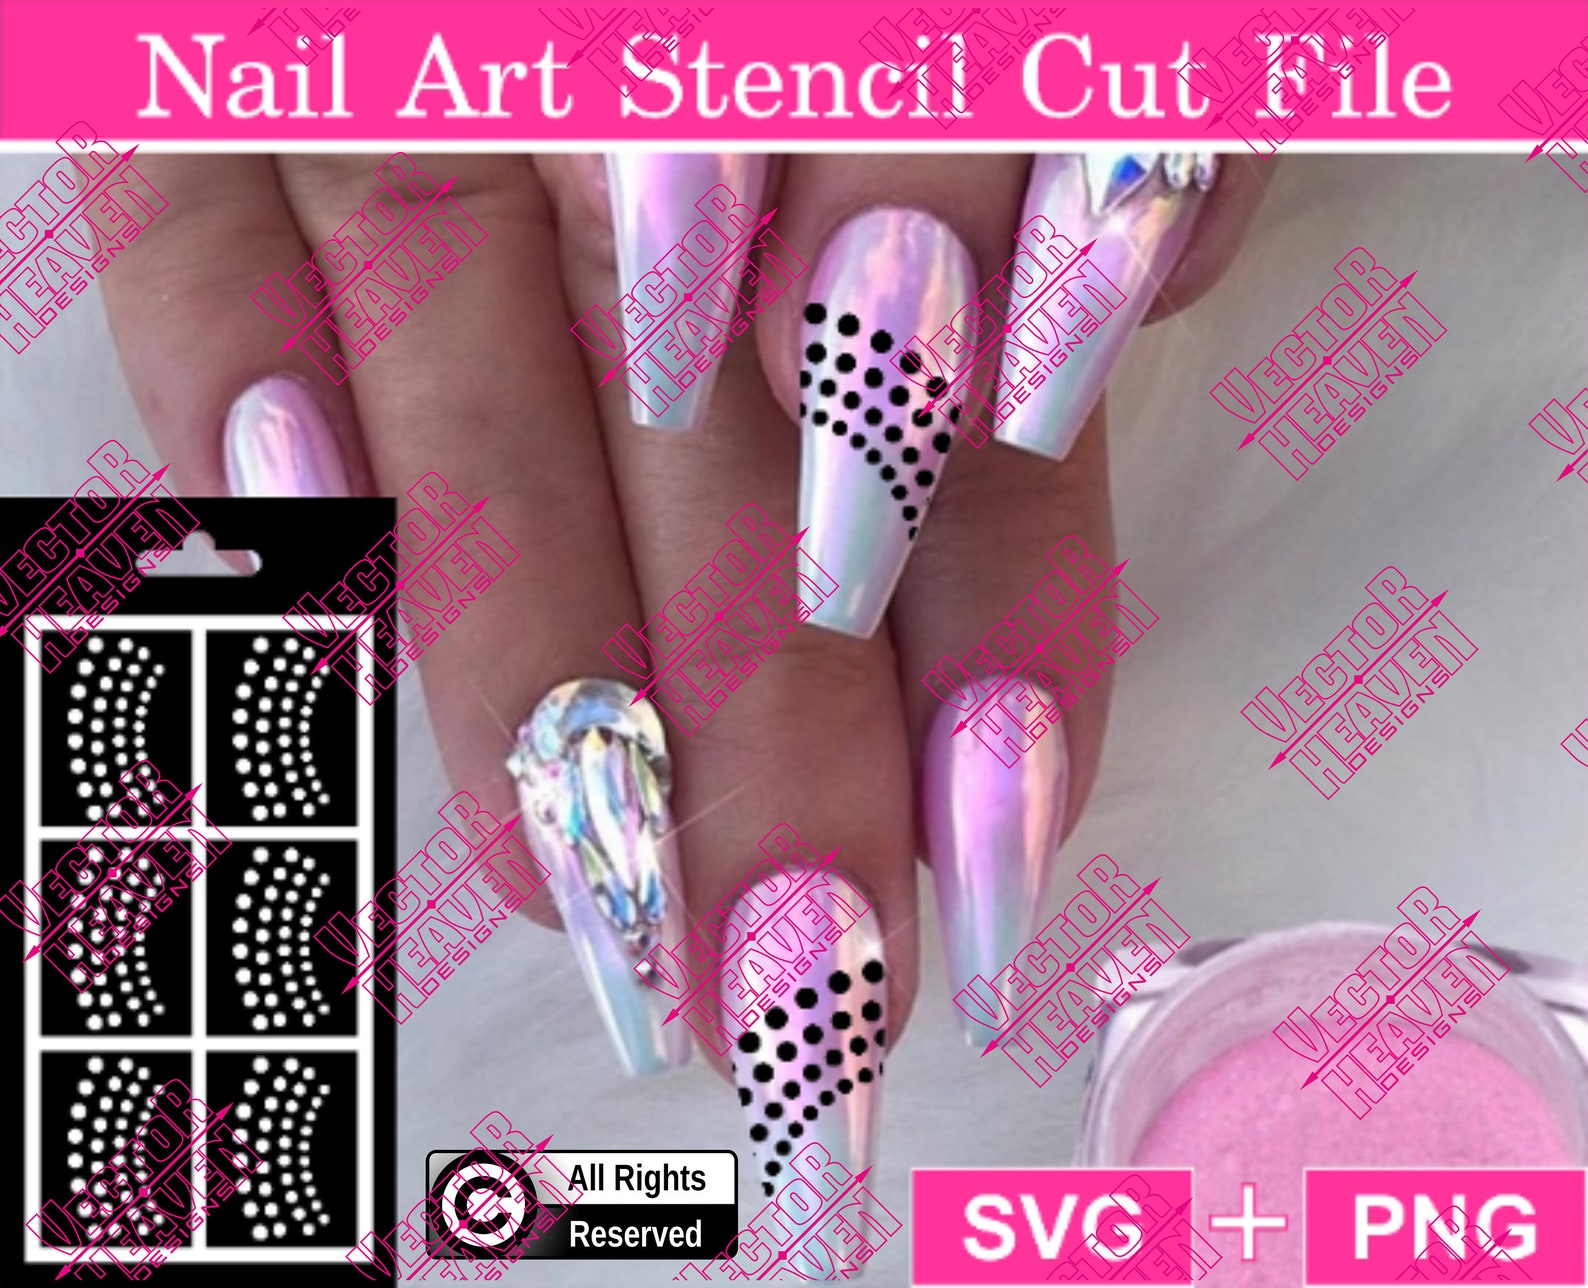 6. Nail Art Stencil and Stamp Tools - wide 5